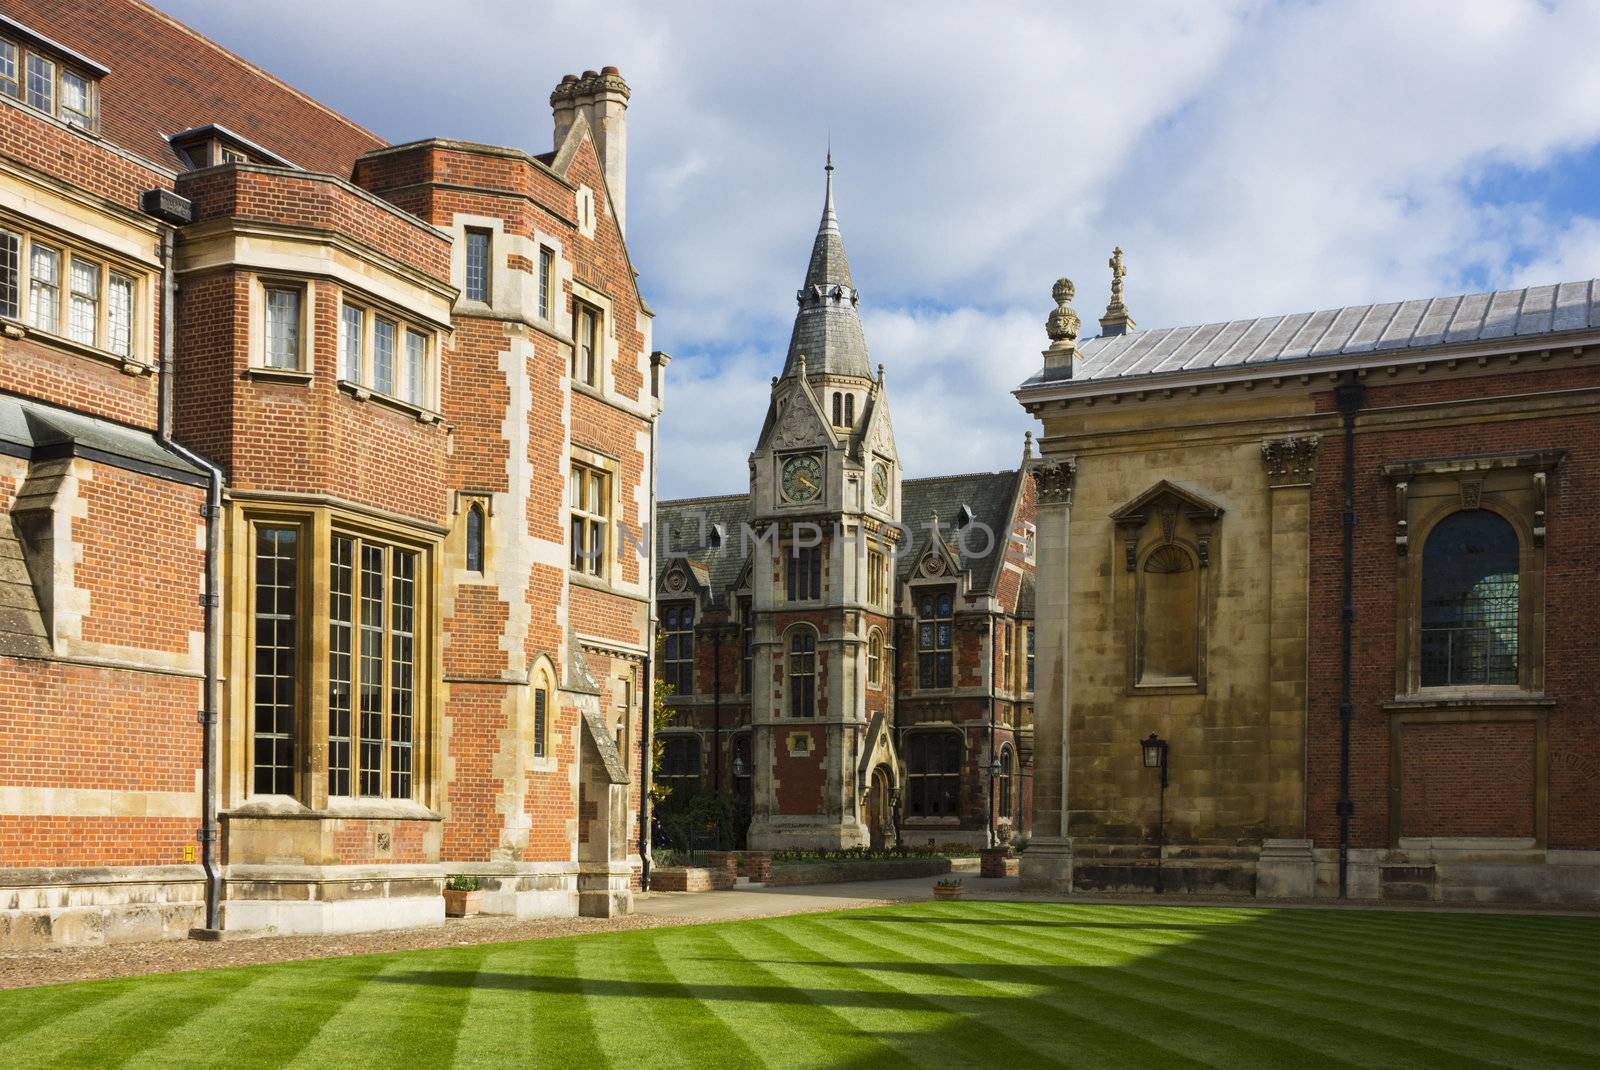 View of Pembroke College in Cambridge, United Kingdom in a bright sunny day with white clouds on the blue sky.